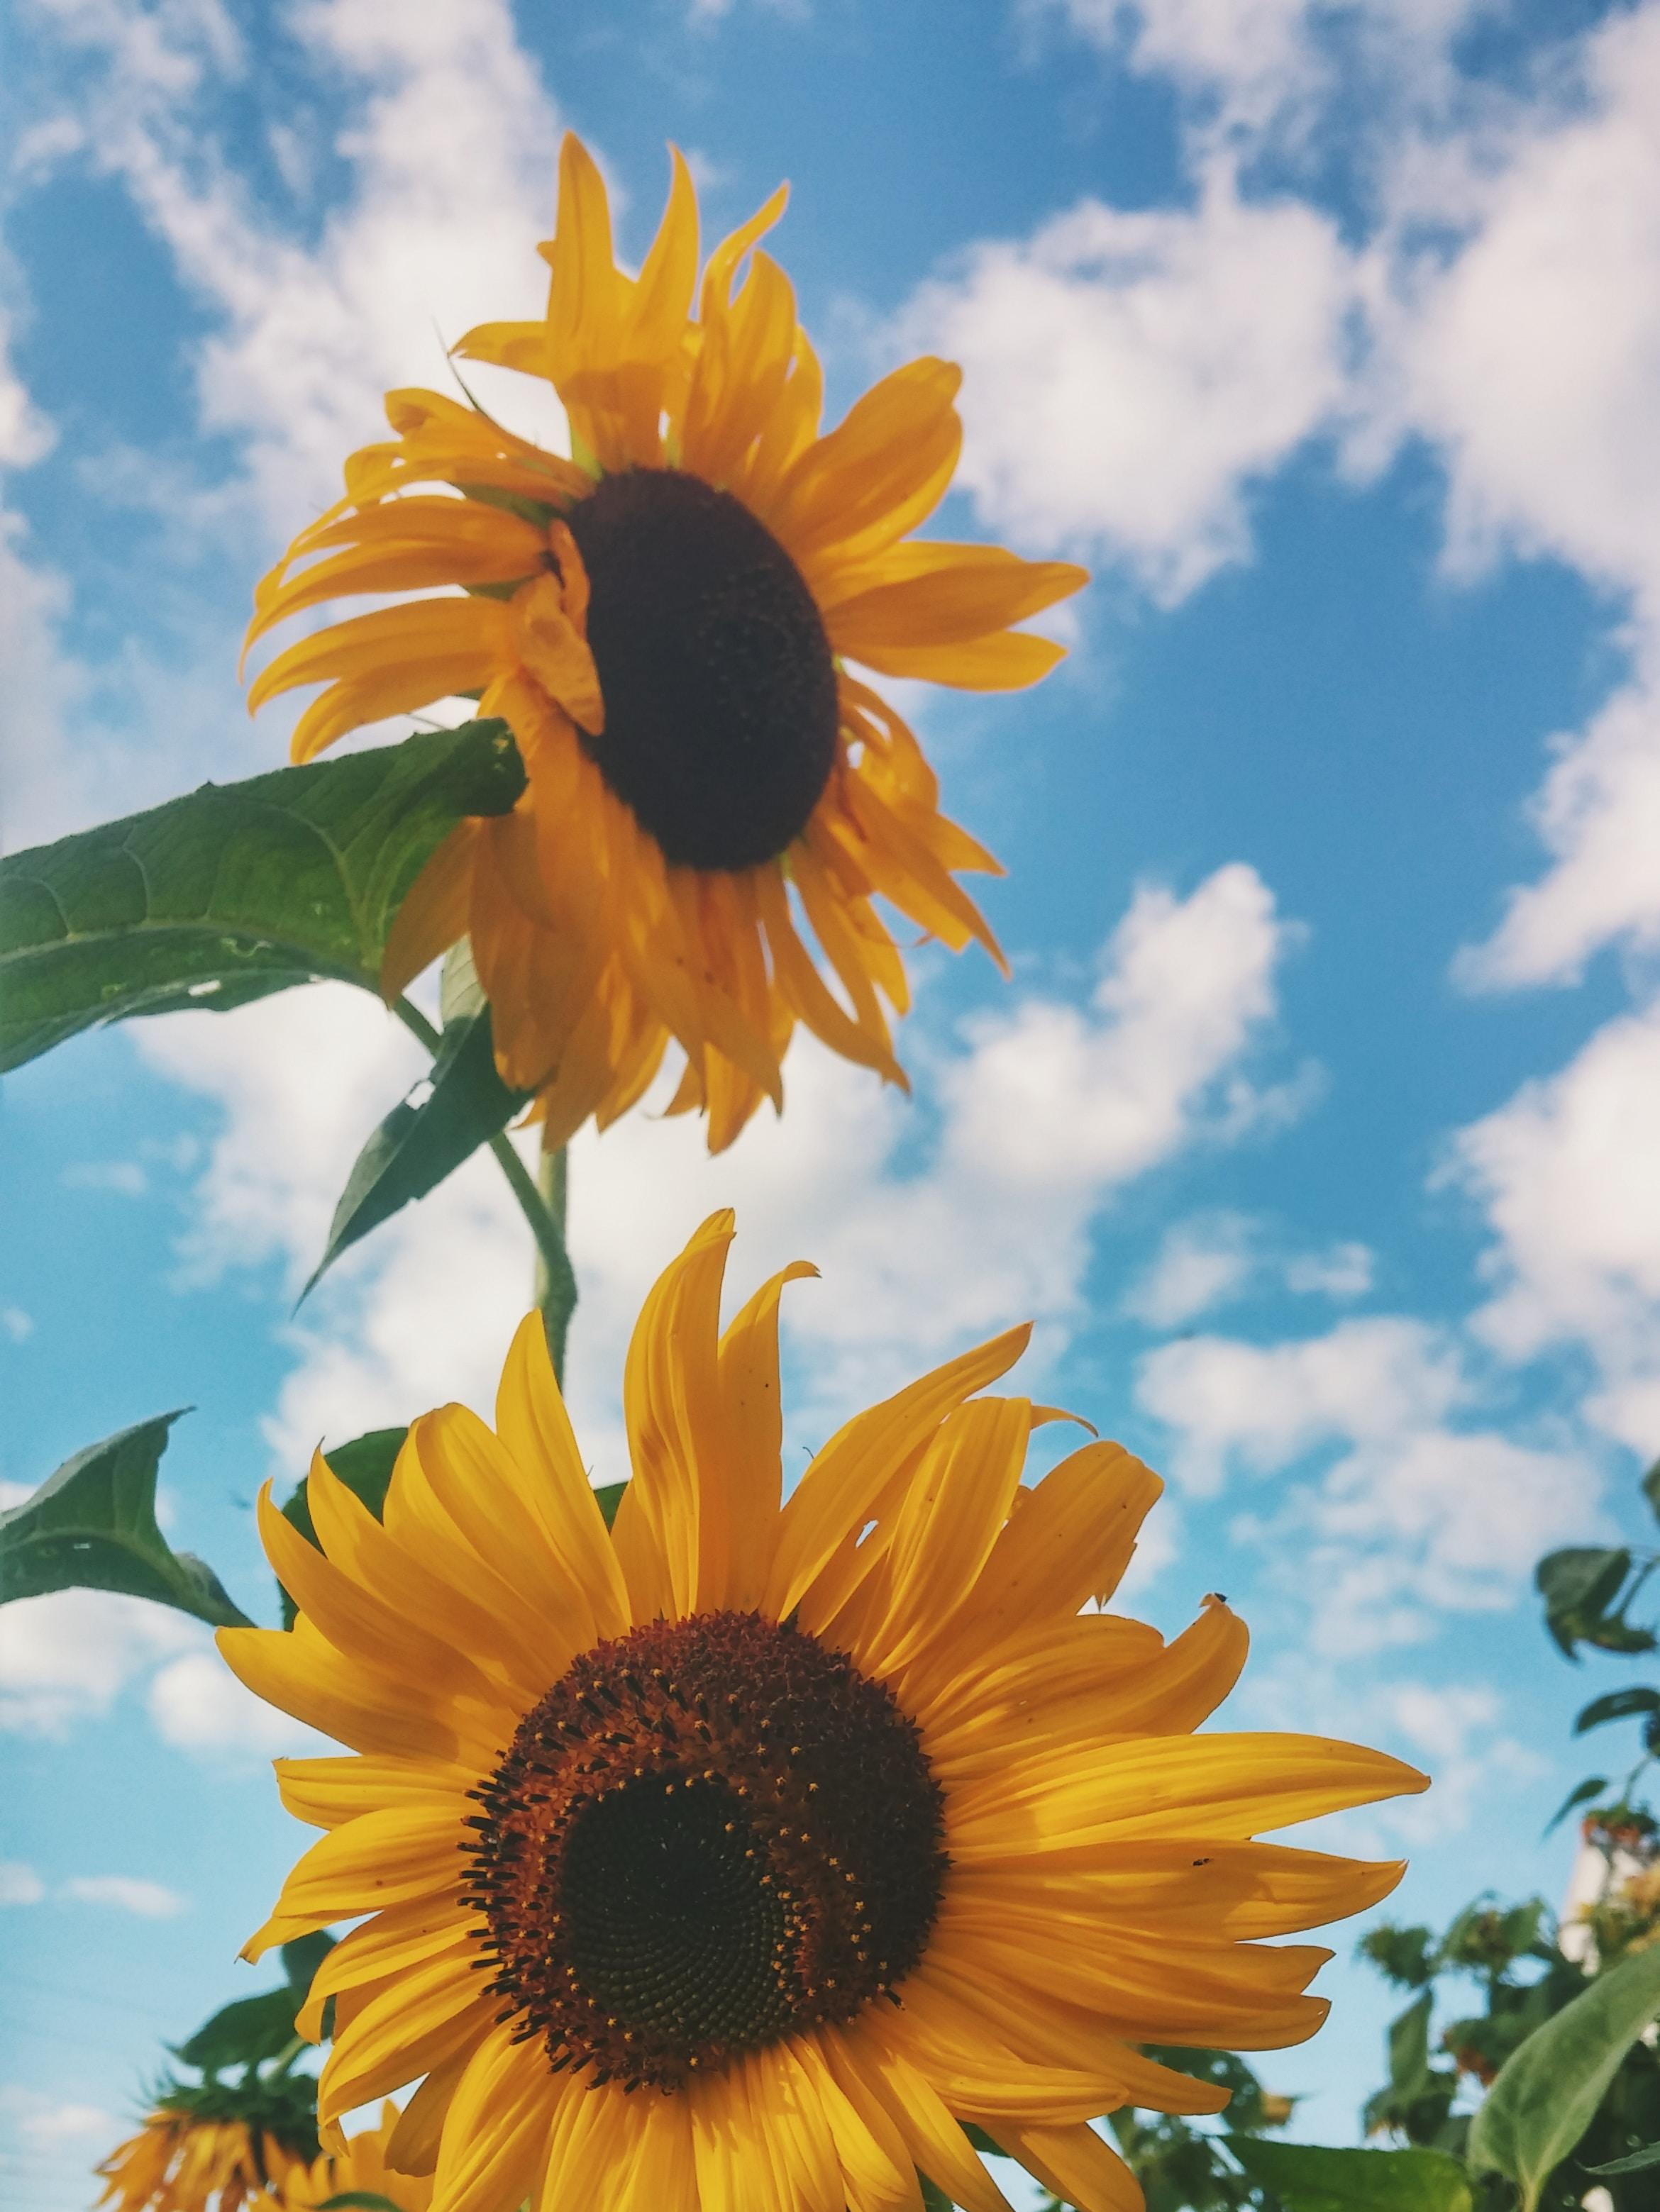 15 Excellent sunflower aesthetic wallpaper desktop You Can Use It At No ...